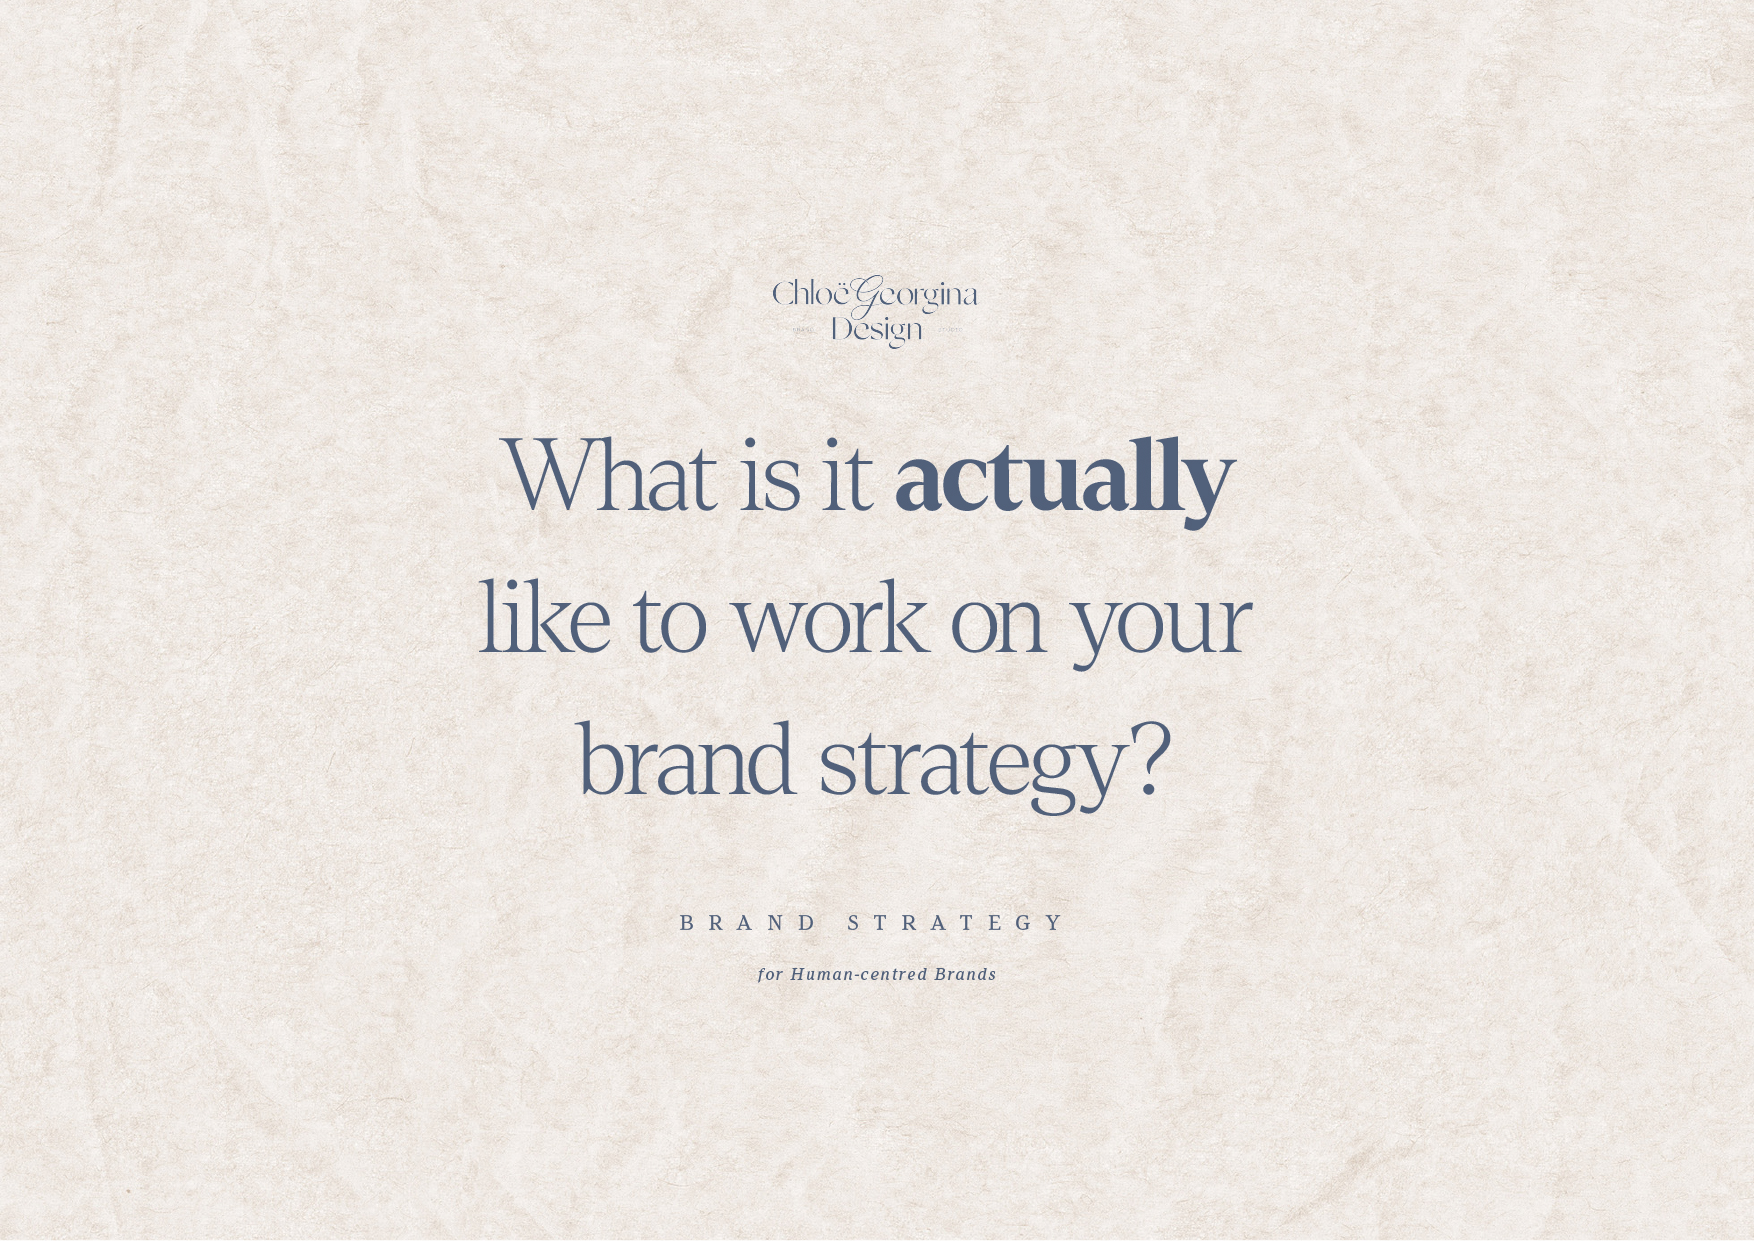 What is it actually like to work on your brand strategy